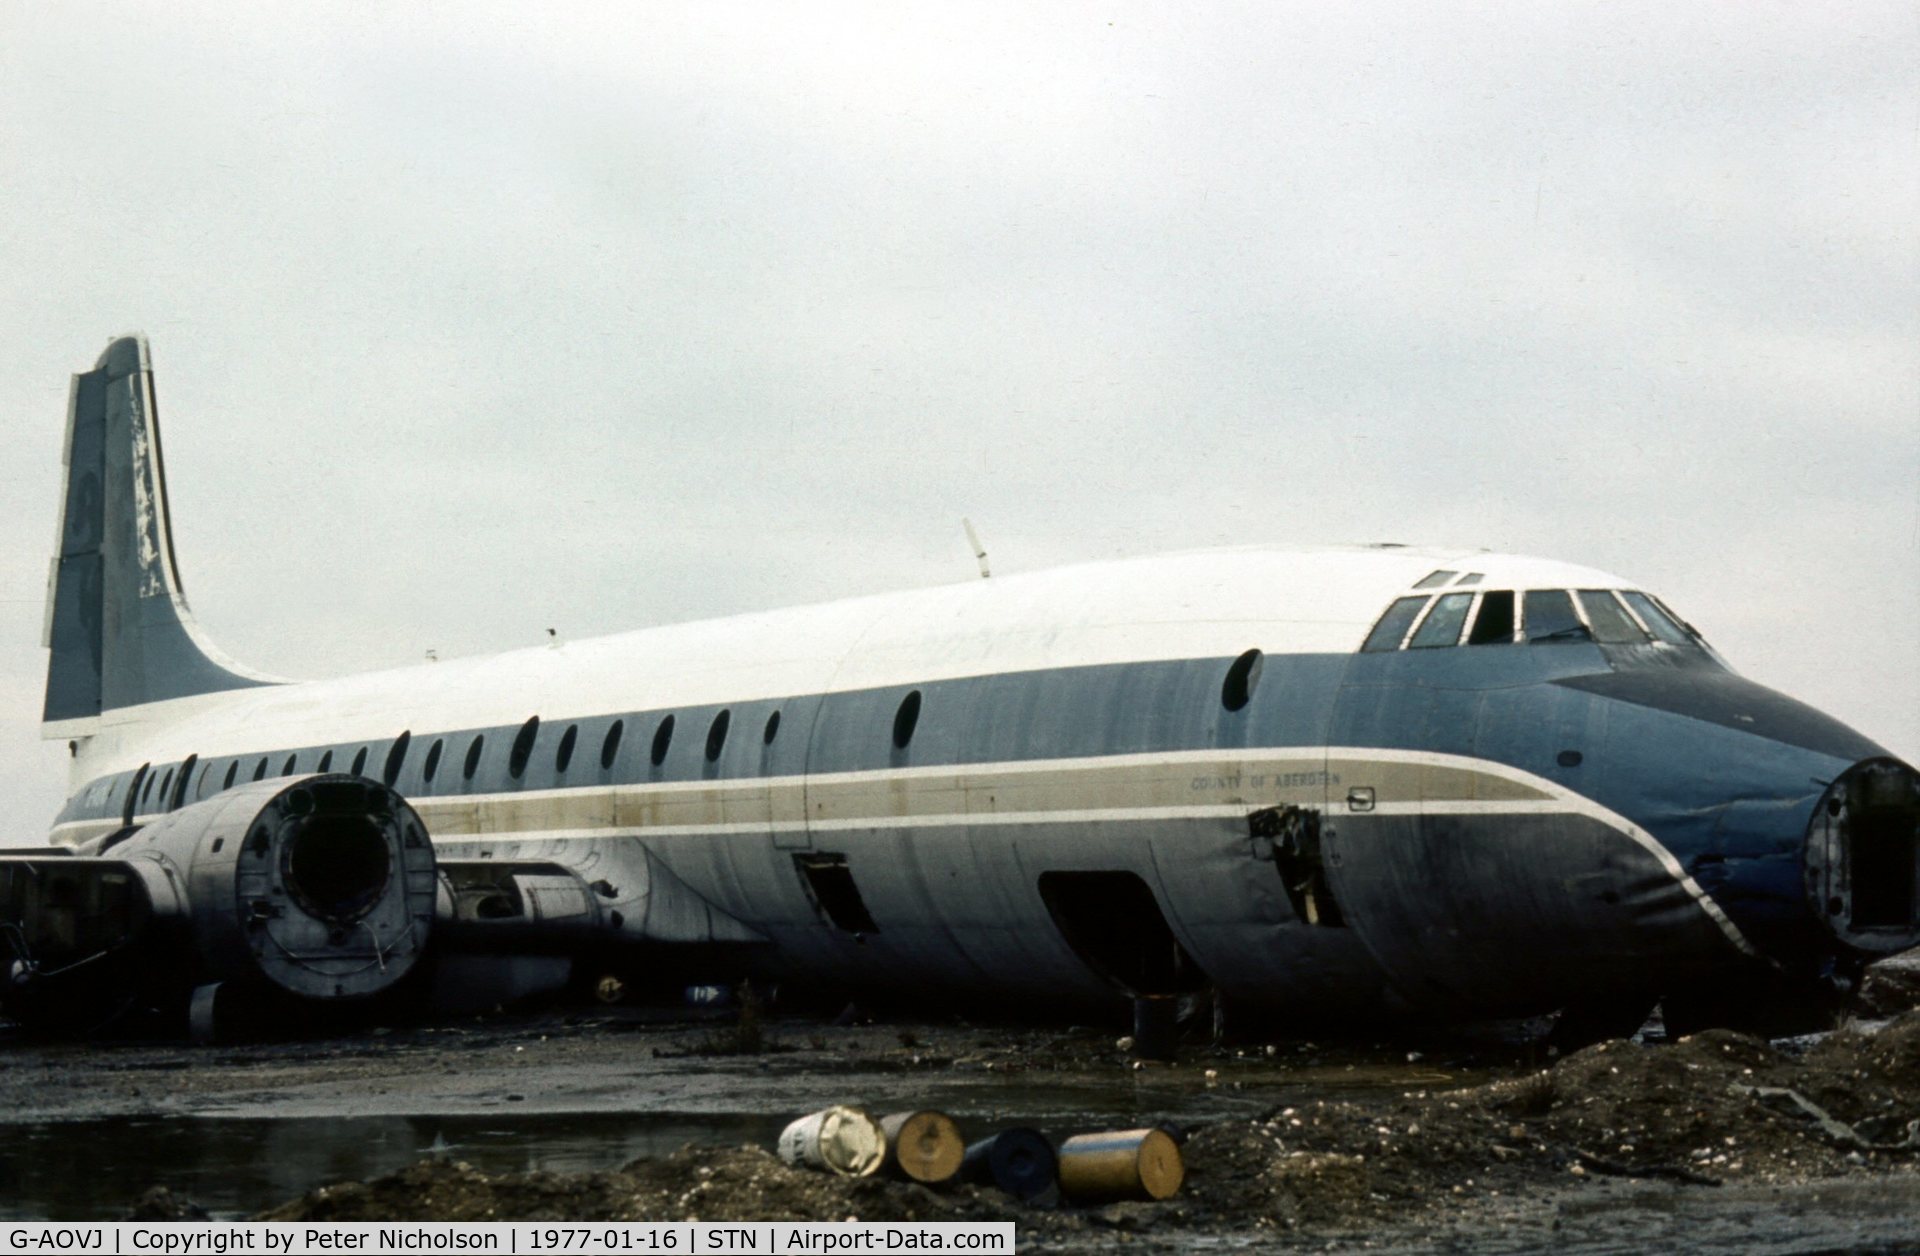 G-AOVJ, Bristol 175 Britannia 312 C/N 13418, Britannia 312 of Caledonian Airways spent its final days in the CAA Fire Training Compound at Stansted and was seen there in January 1977. Its last flight was to Stansted on November 17, 1970.